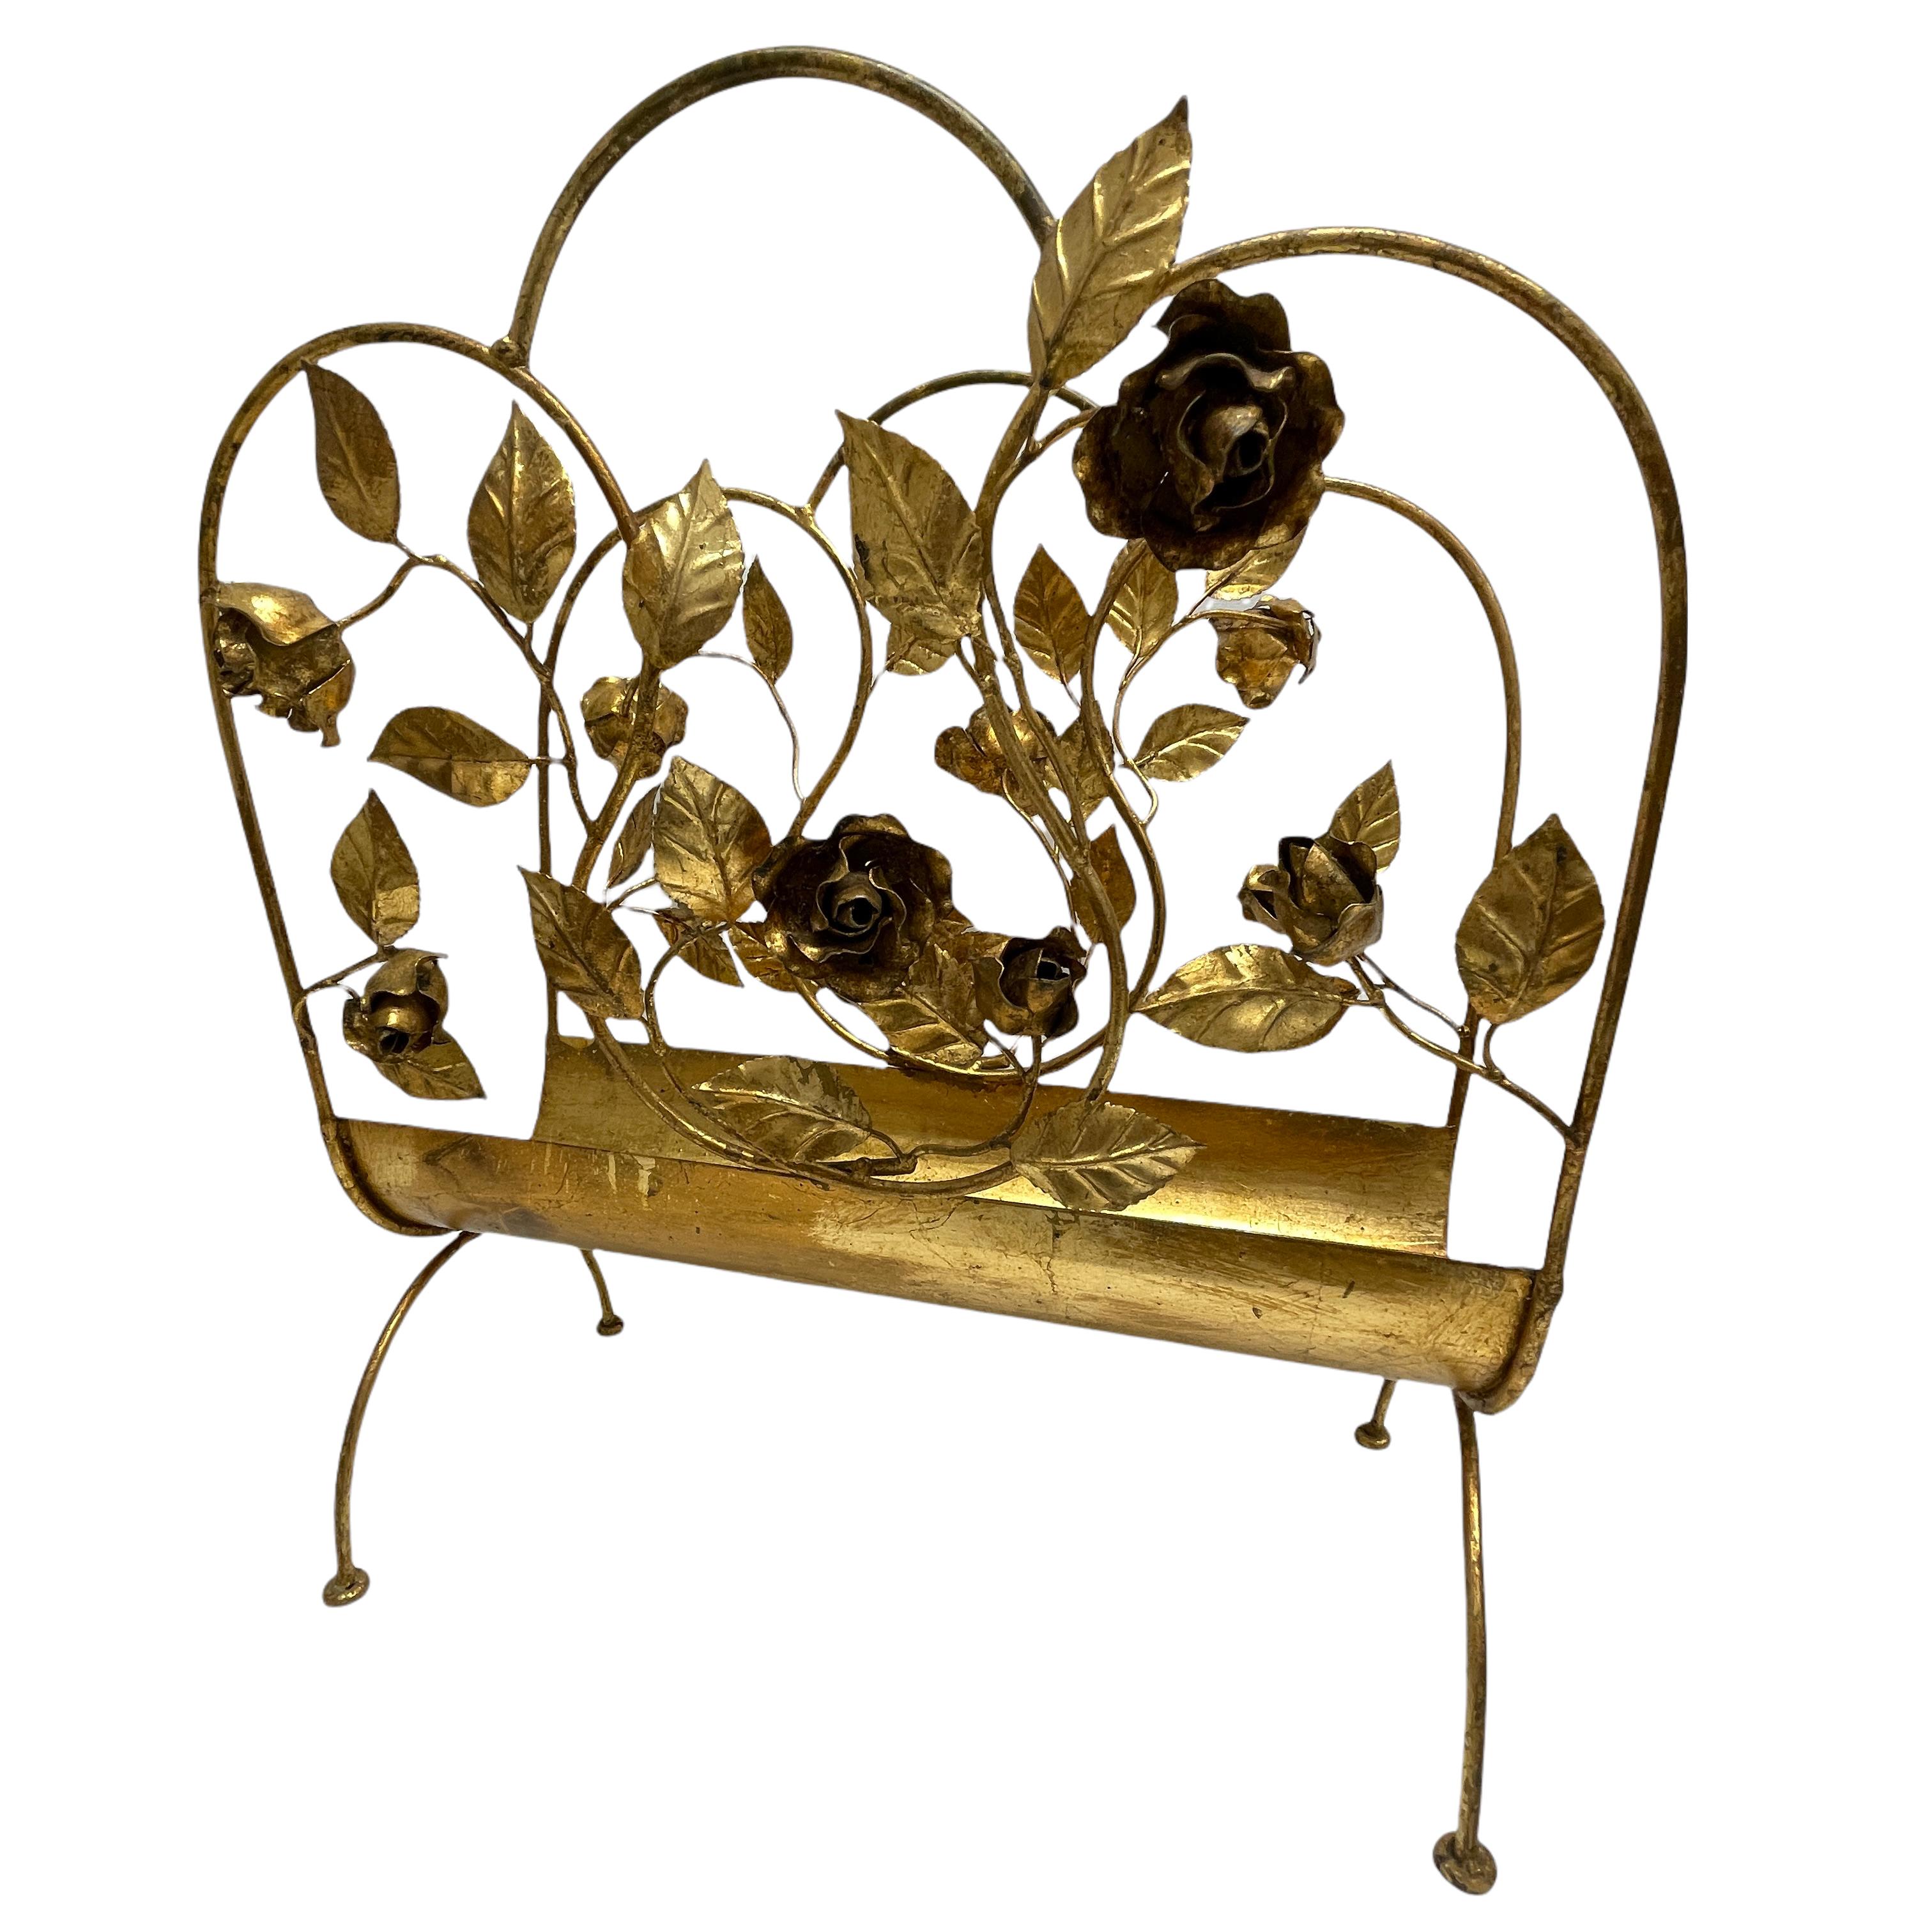 Beautiful Florentine Italian gilded magazine rack. Perfect as a storage stand near your reading chair. The piece is in beautiful antique condition with patina. There is slight paint and gilding loss commensurate with its age. The patina only adds to